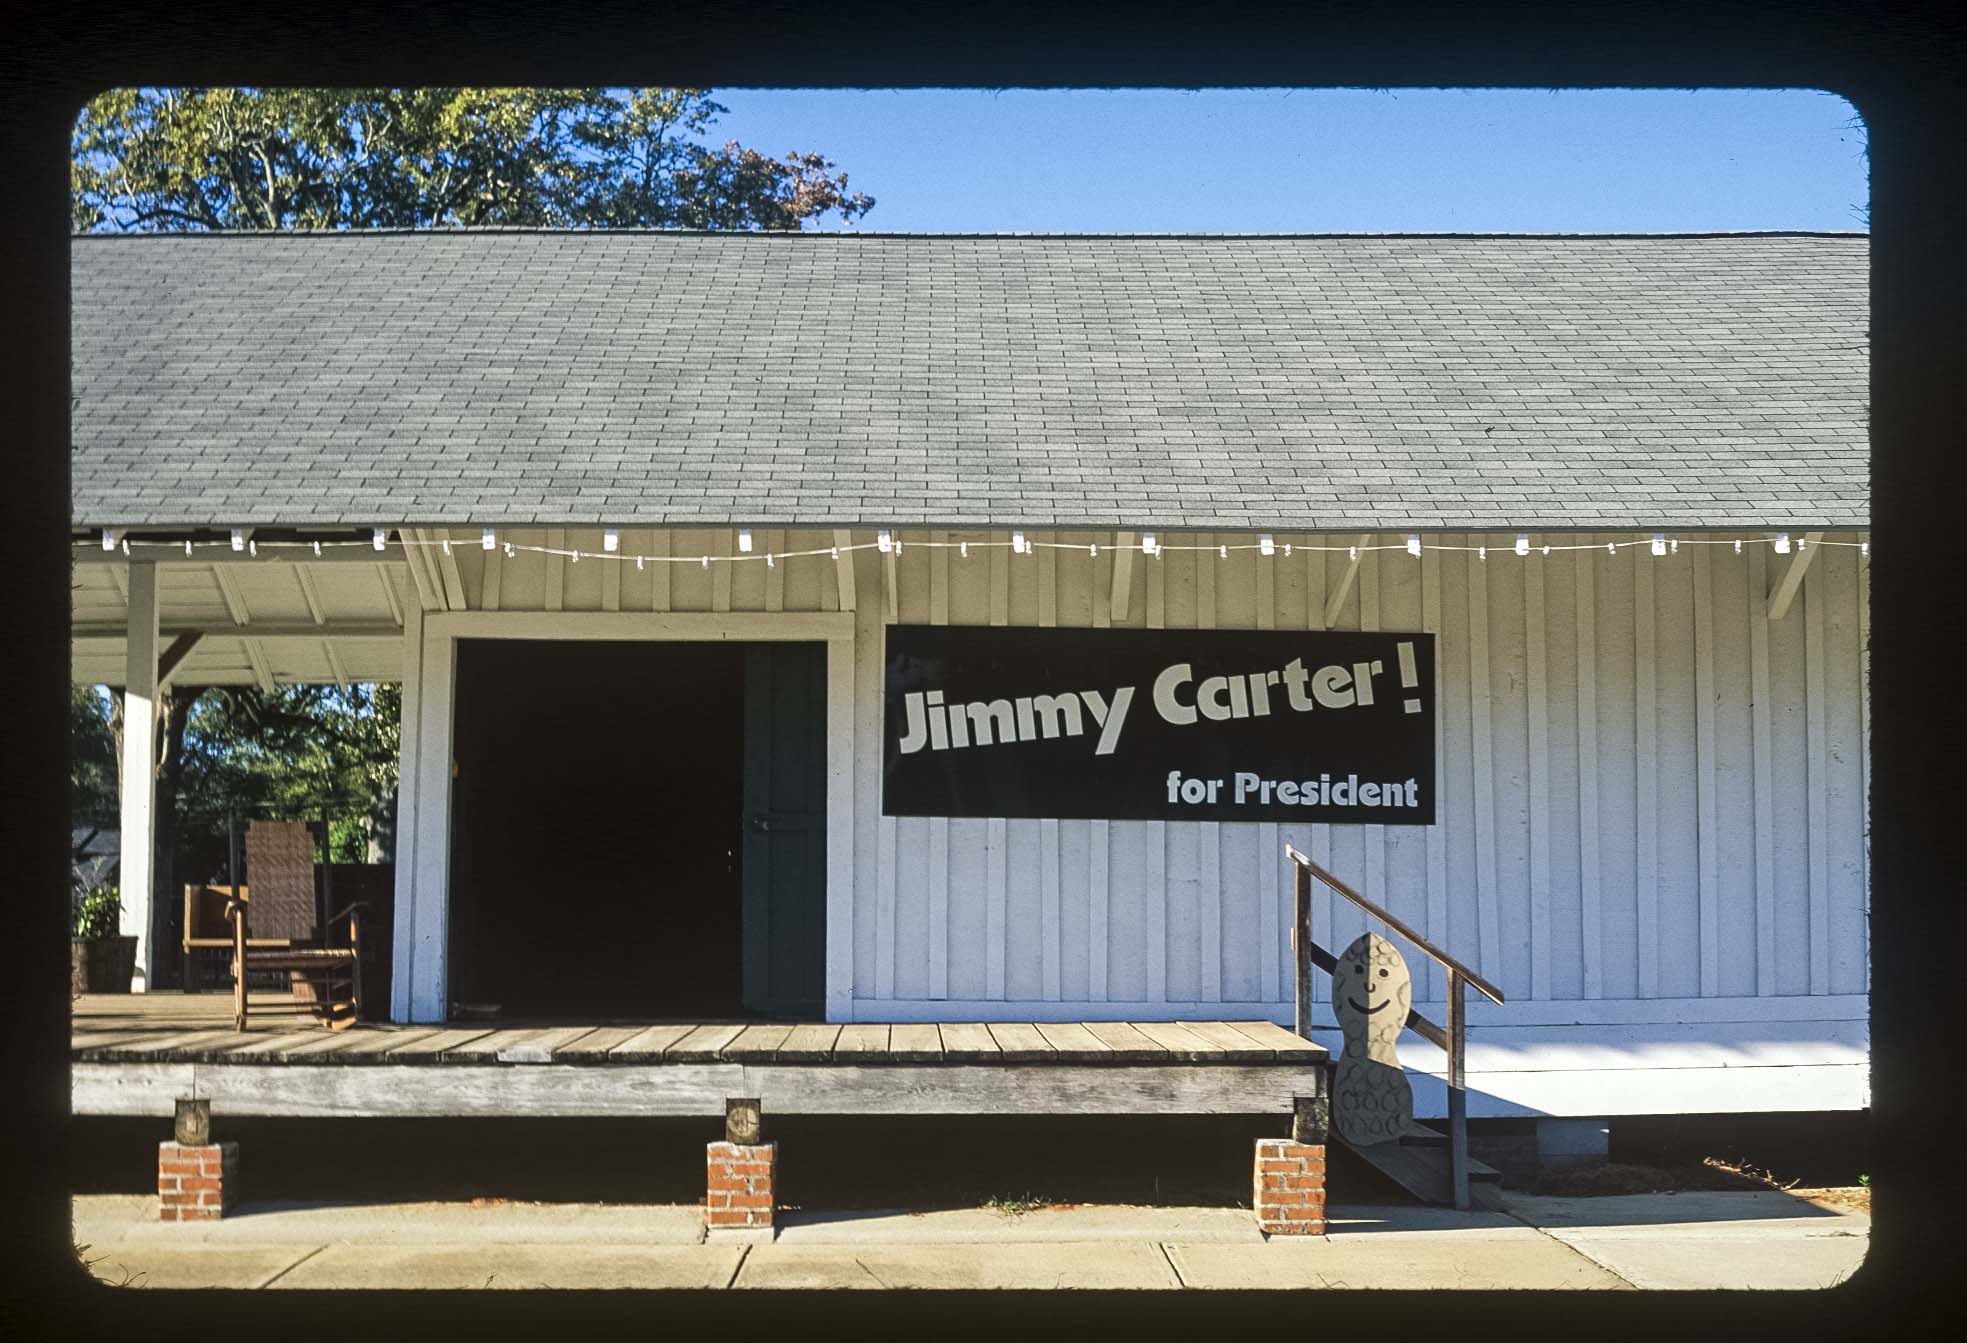 A 'Jimmy Carter! for President' sign on a white building